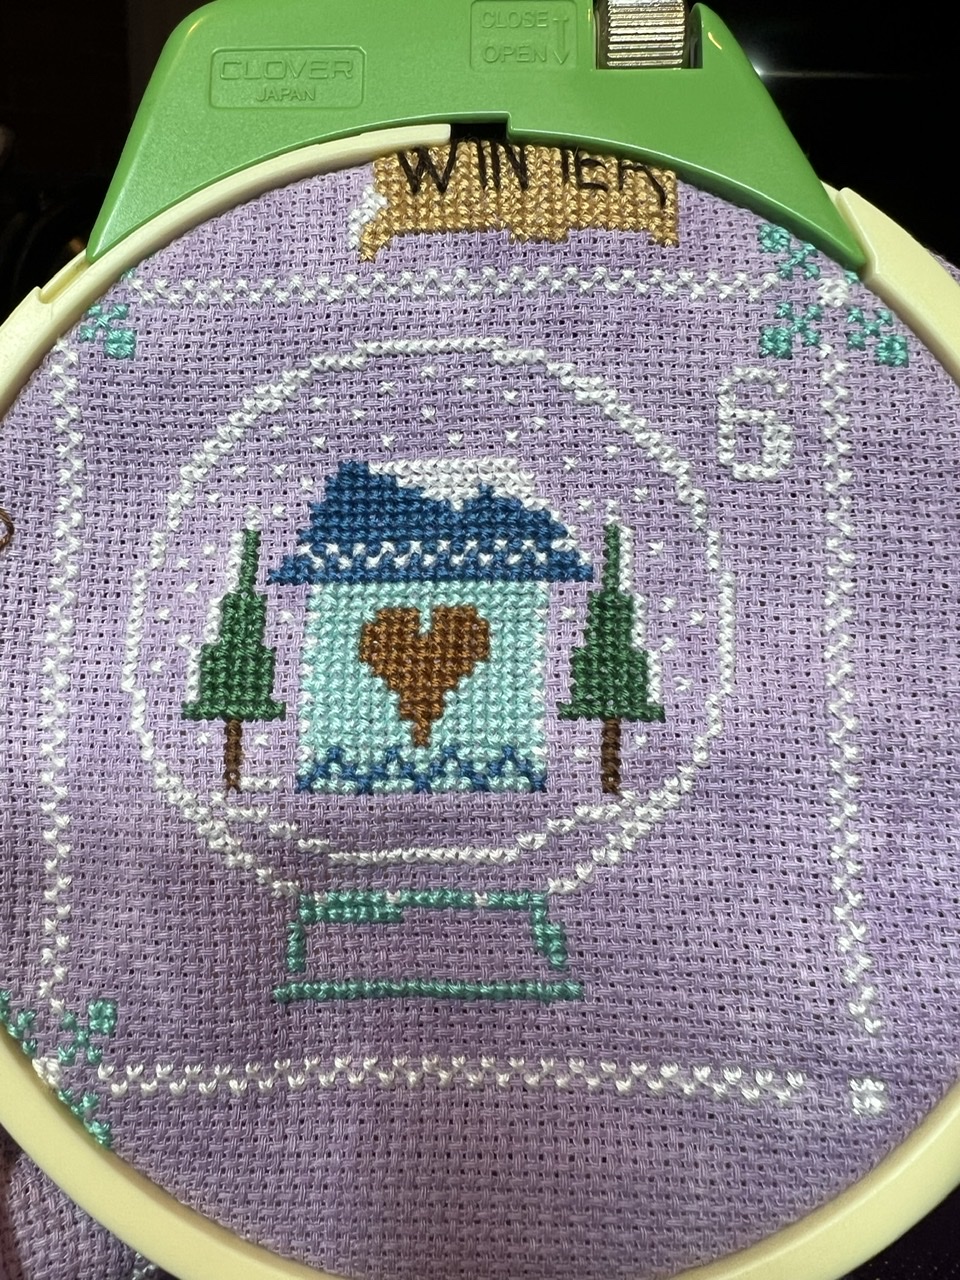 Completed February 2021 on my 365 days of stitches project! : r/Embroidery